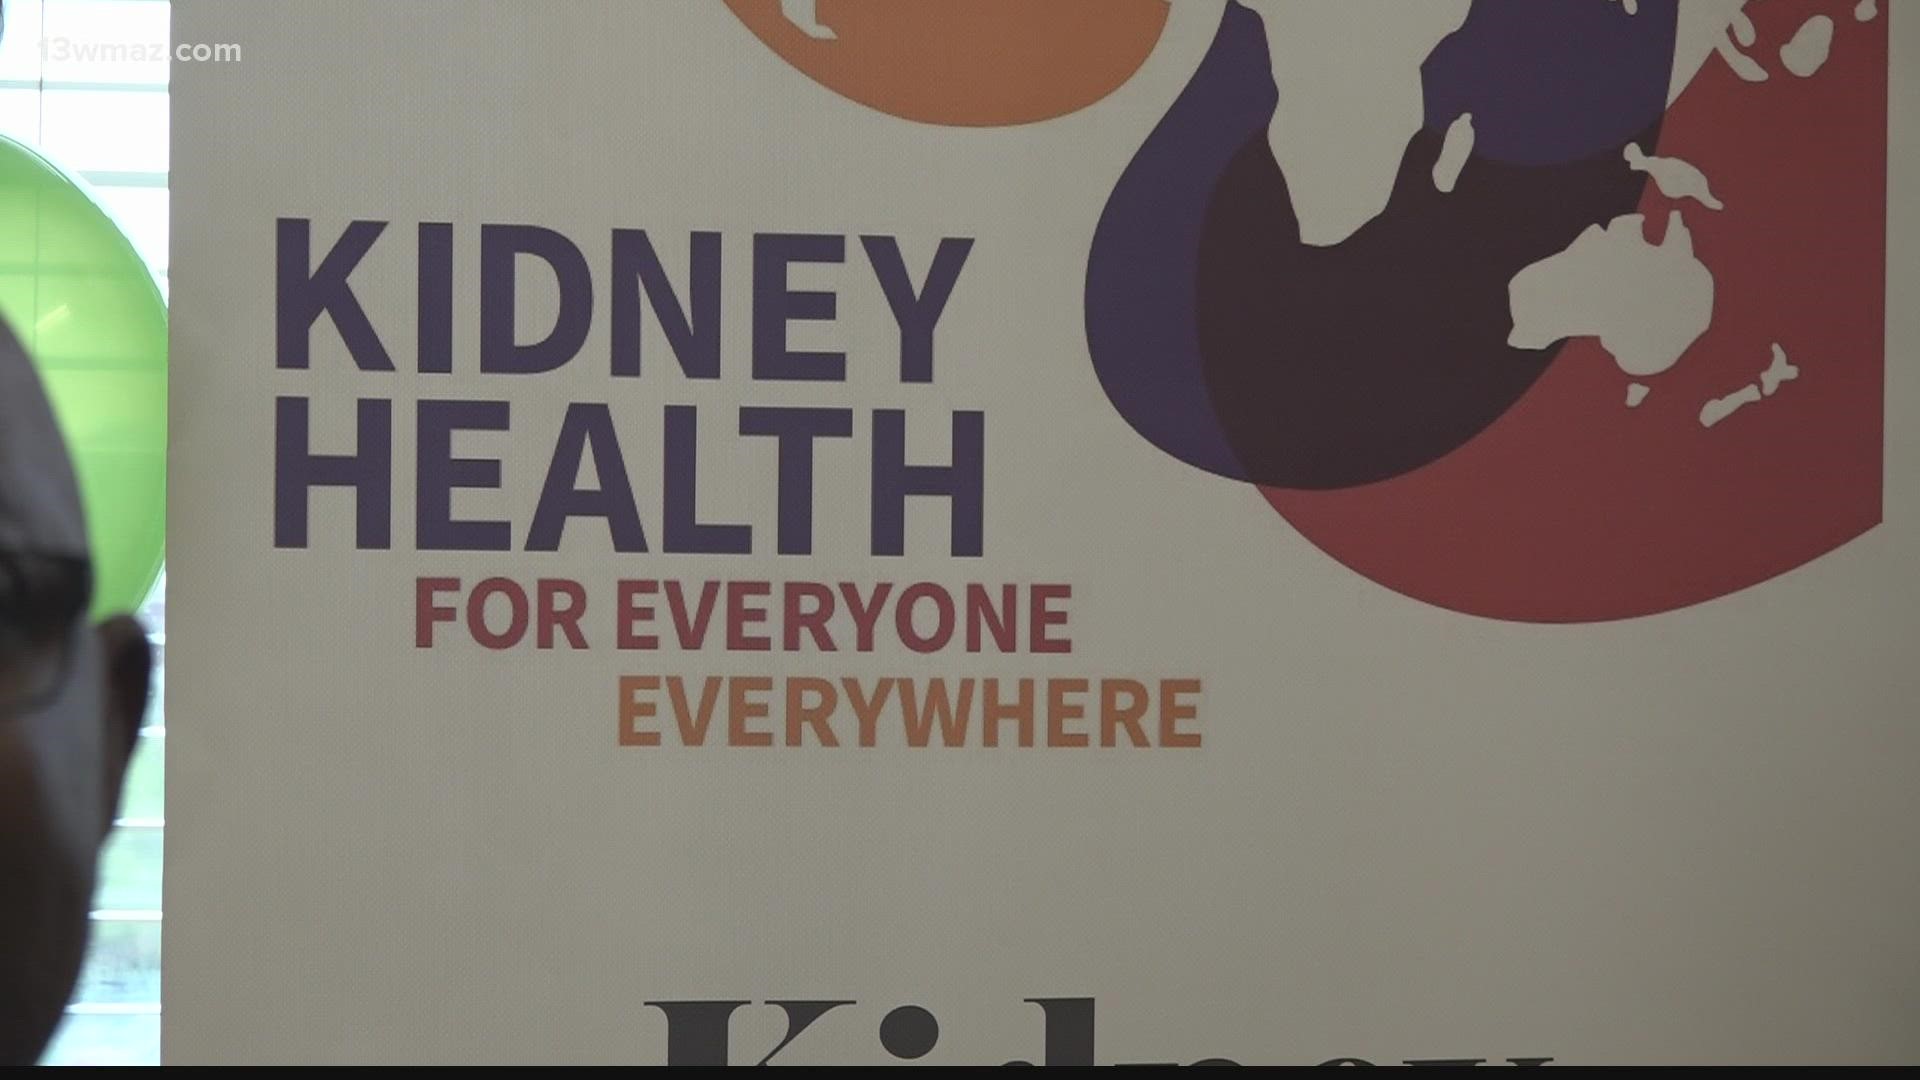 Nurse practitioner Heather Self says most people aren't even aware that they have kidney disease.